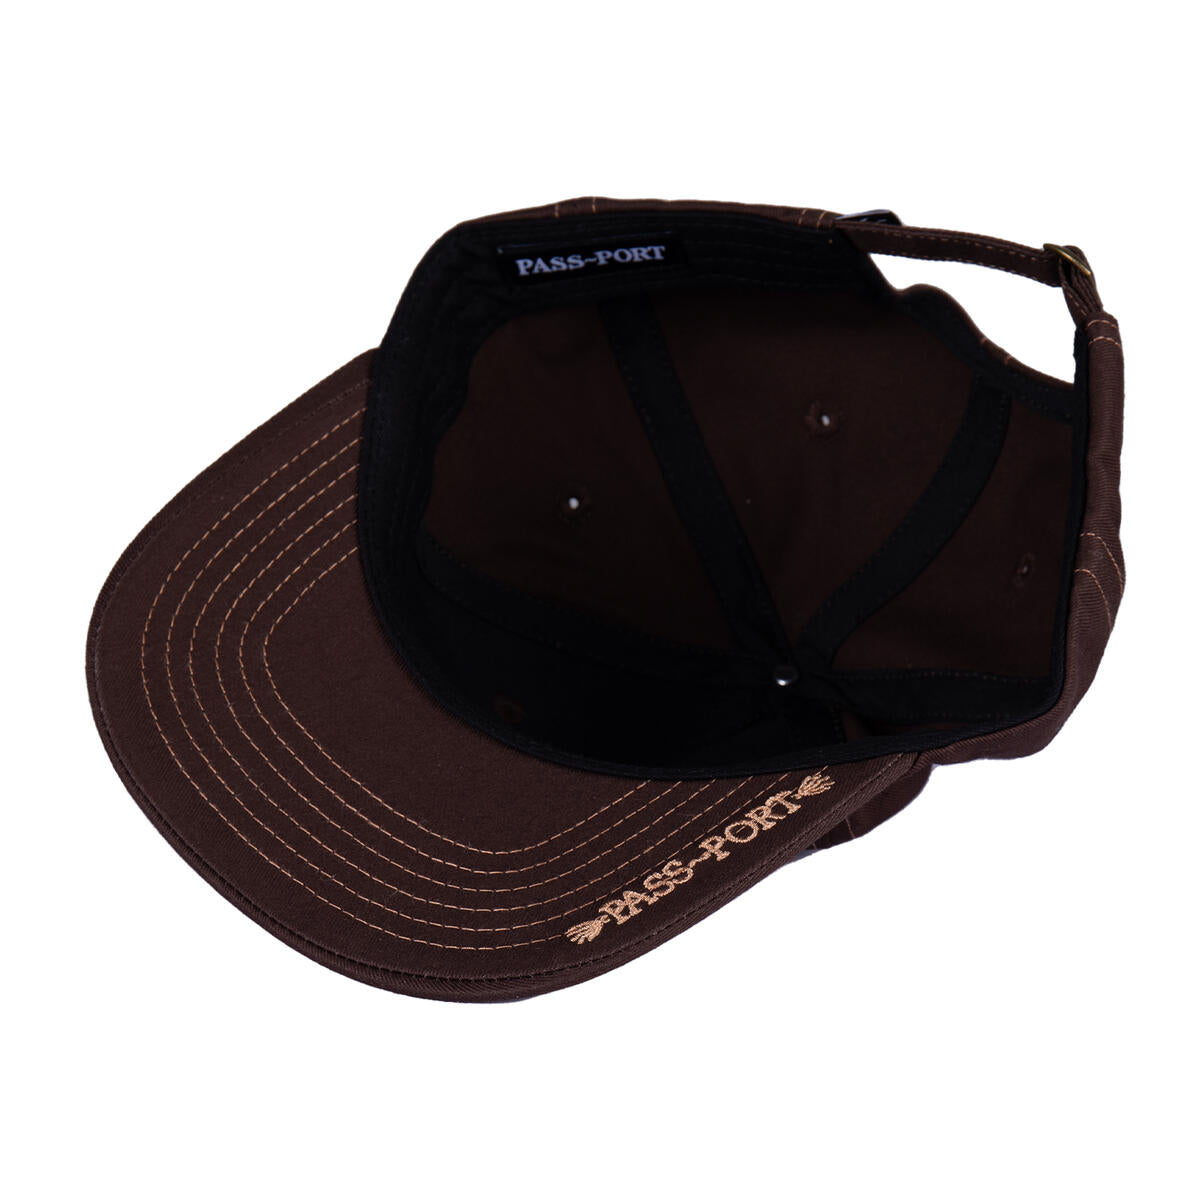 PASS~PORT SKATEBOARDS MAESTRO CASUAL CAP COLOR VARIANT